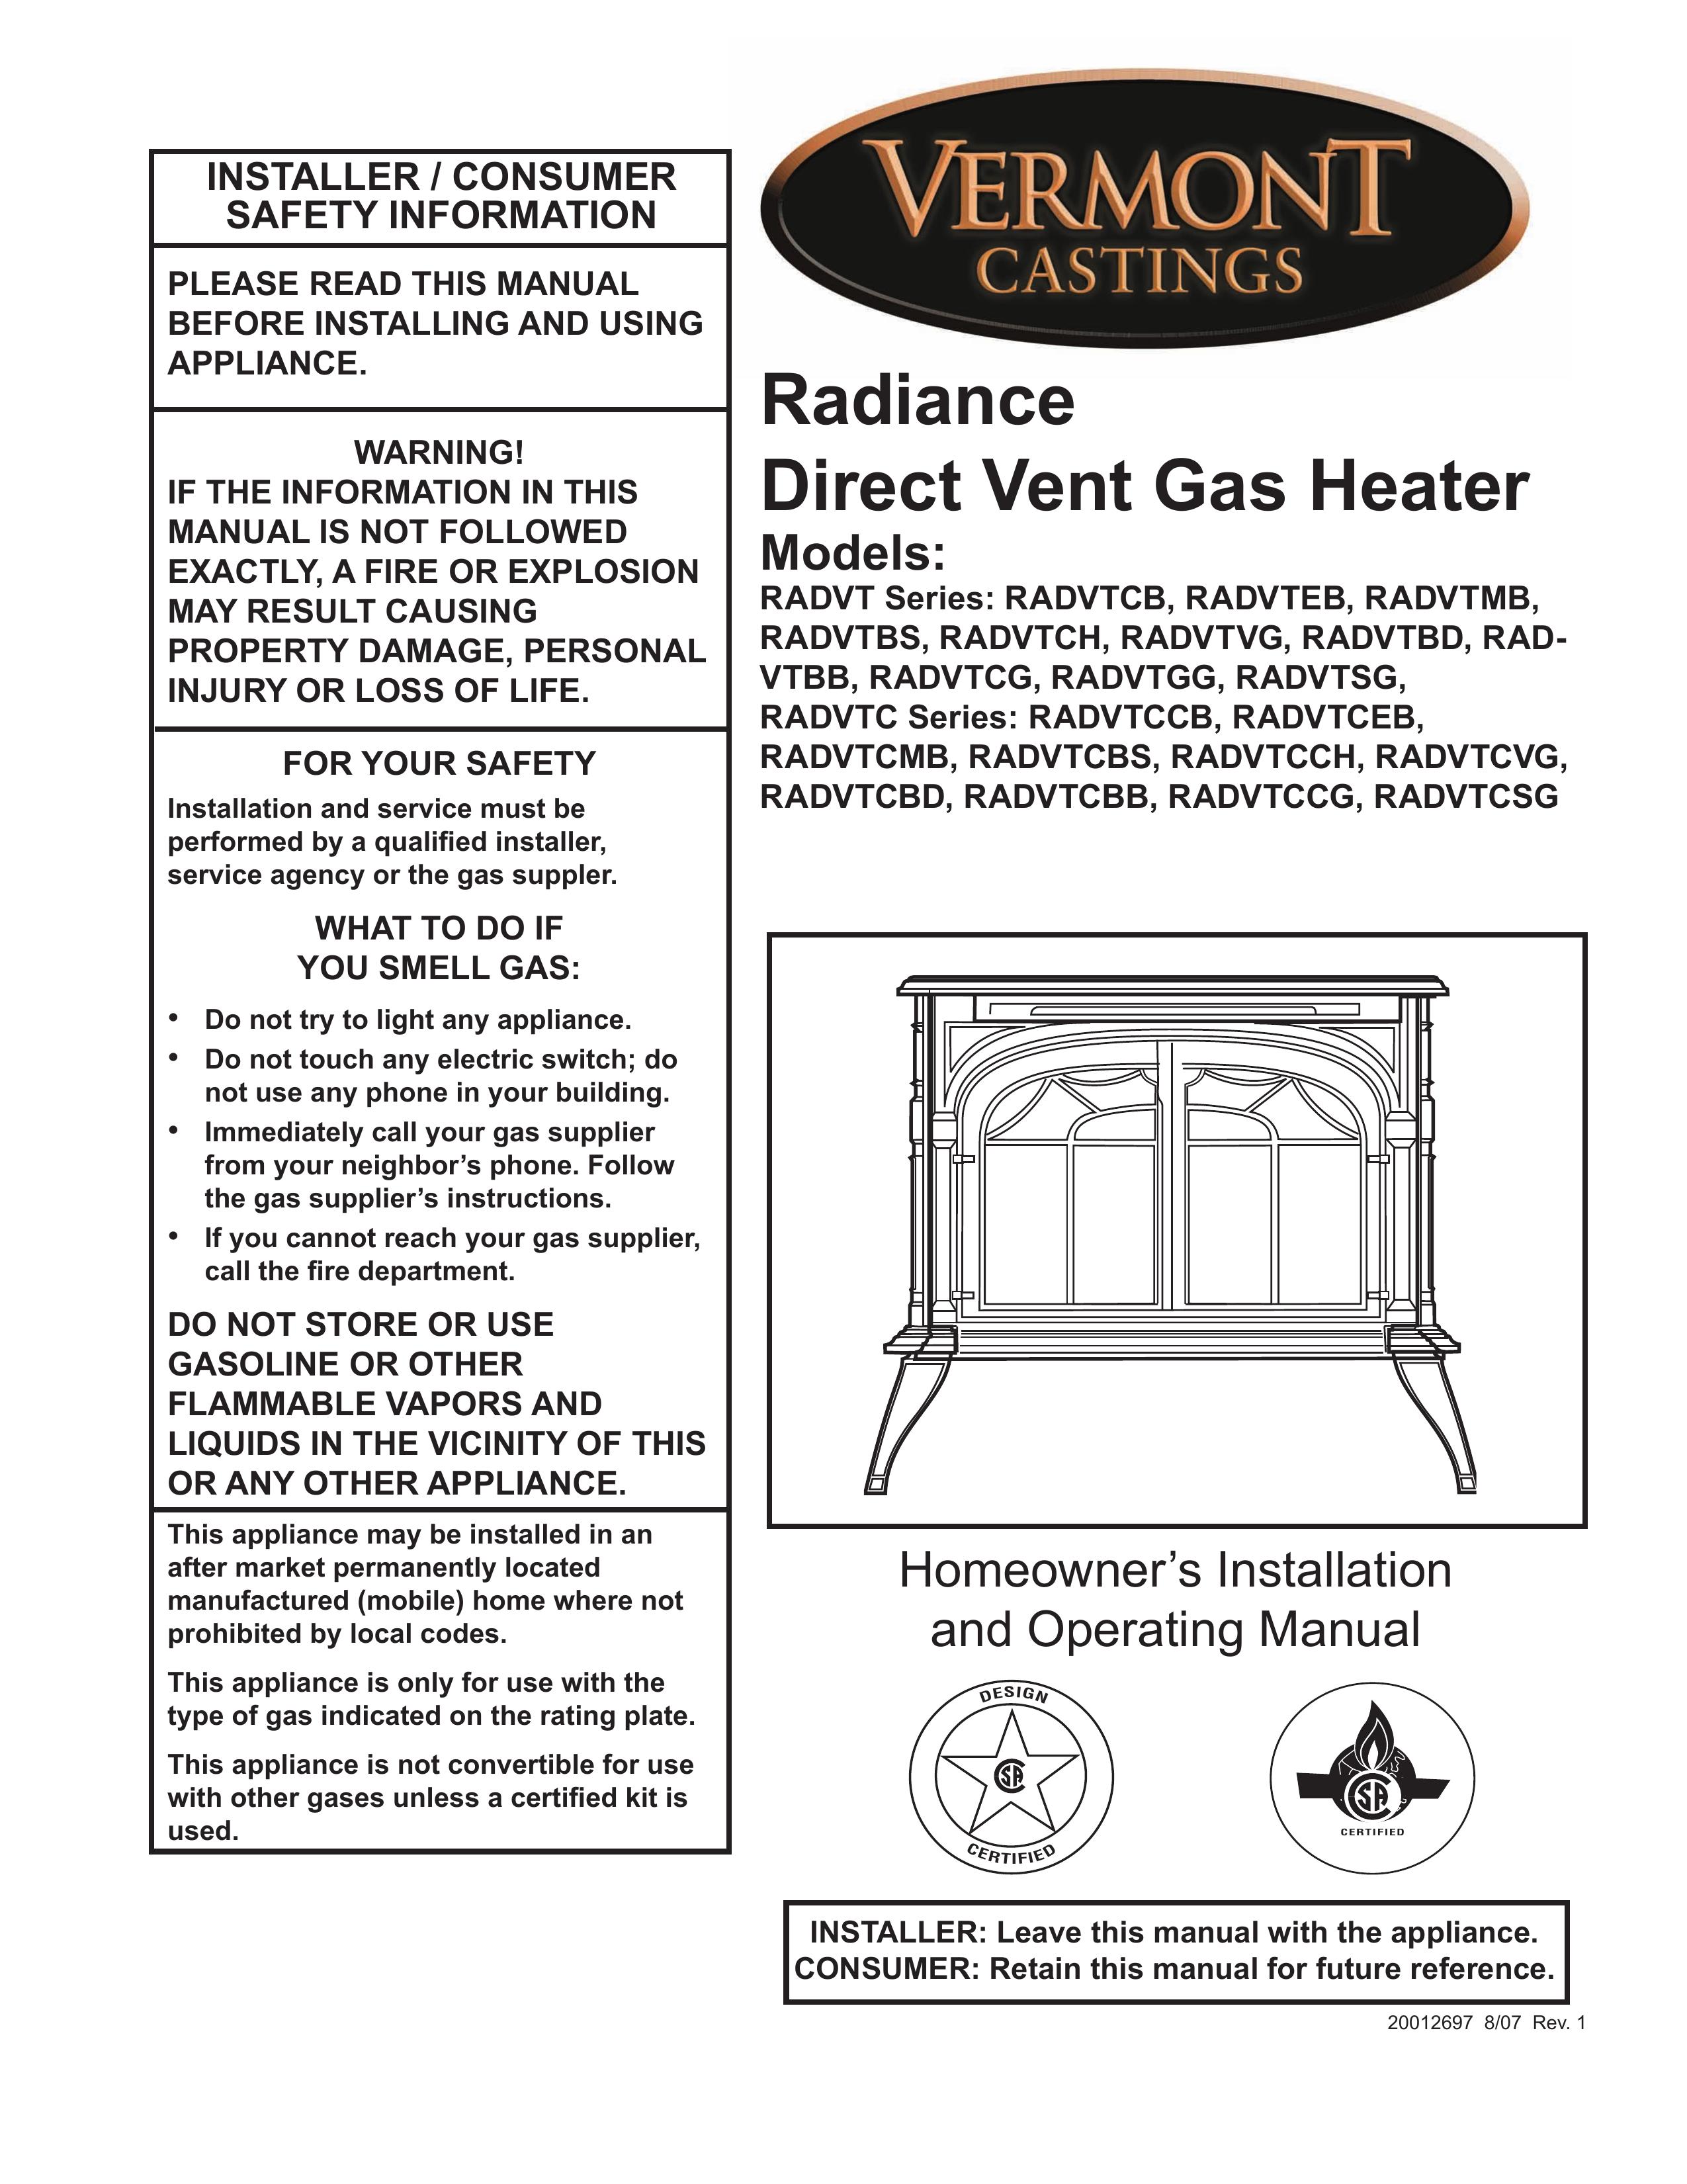 Vermont Casting RADVTCB Outdoor Fireplace User Manual